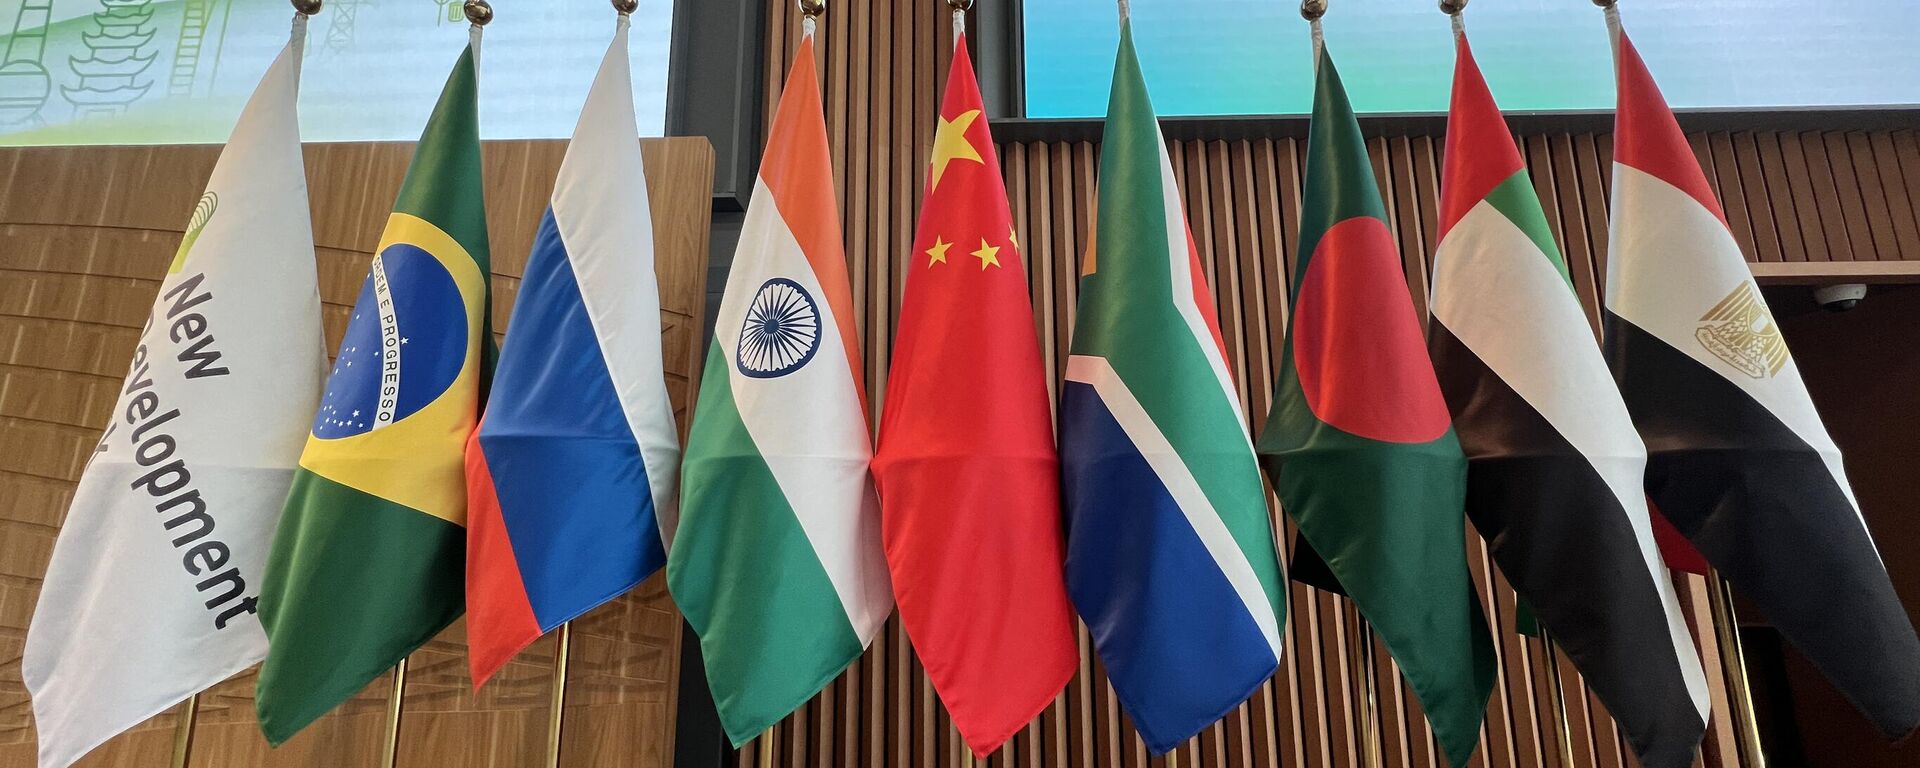 Flags are seen displayed at the opening ceremony of the New Development Bank Eighth Annual Meeting in Shanghai on May 30, 2023 - Sputnik International, 1920, 10.06.2023